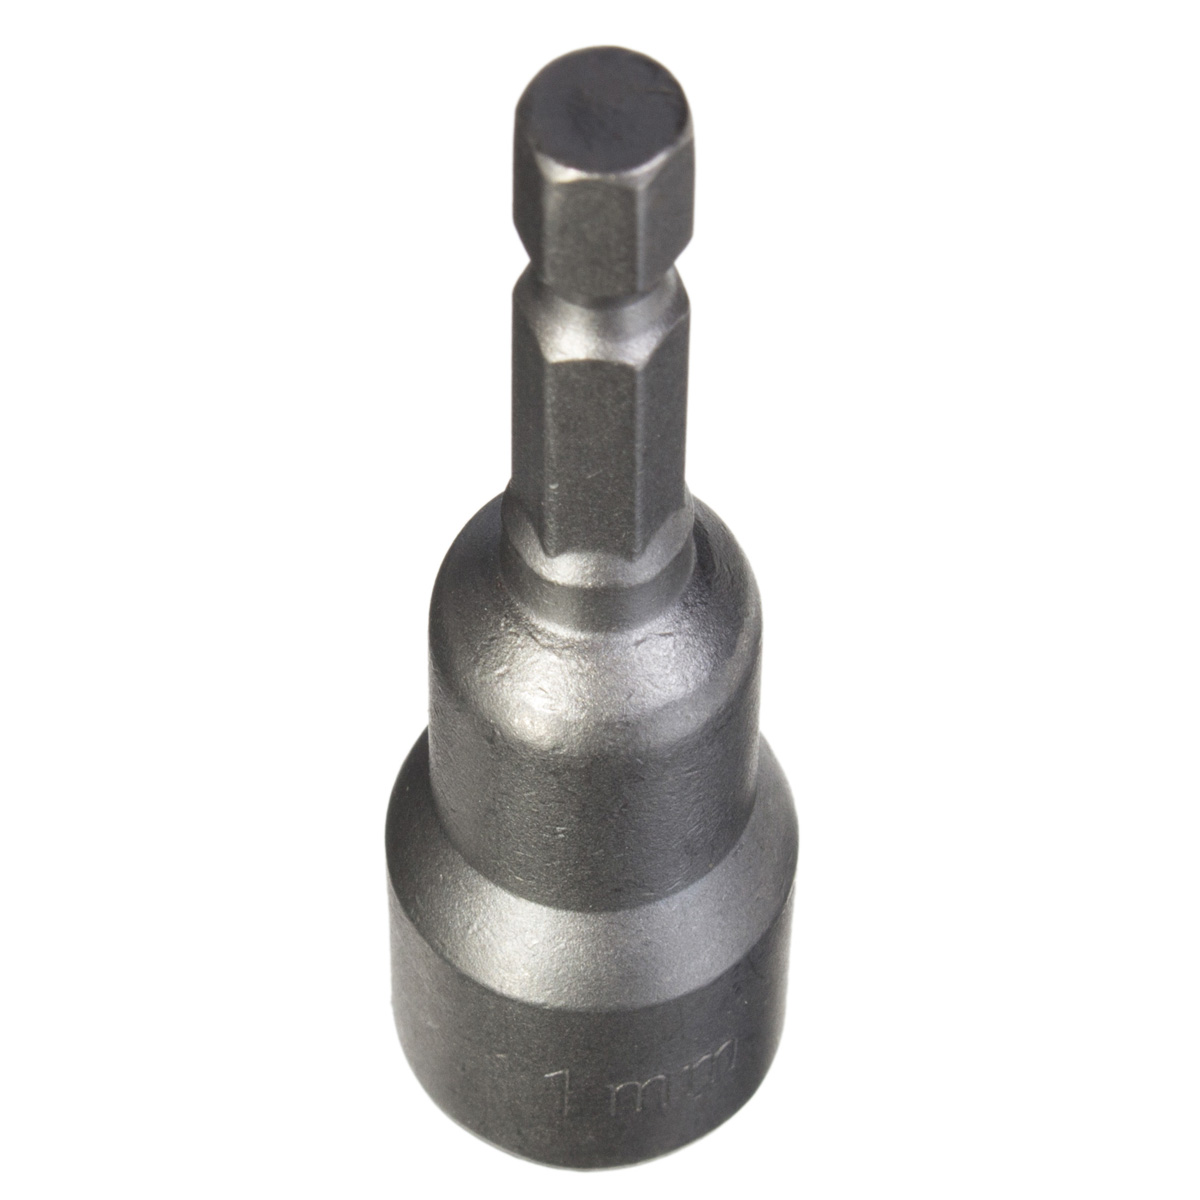 65mm-14-Inch-Hex-Socket-Magnetic-Nut-Driver-Setter-6mm-19mm-Drill-Bit-Adapter-996527-3